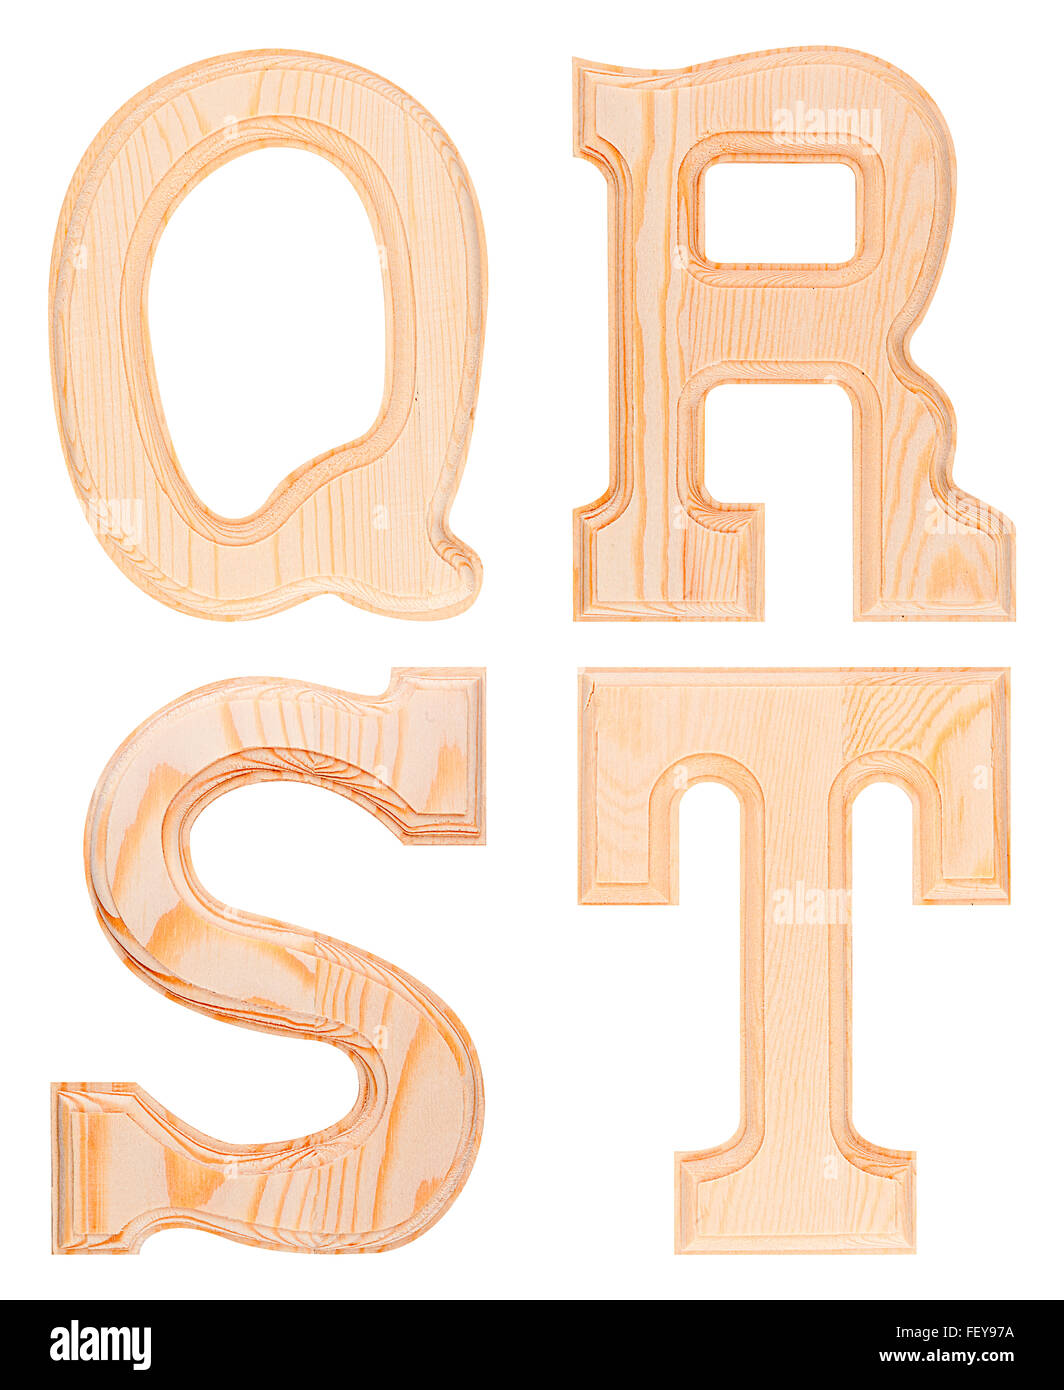 Set of wooden letters Q, R, S, T of the alphabet isolated Stock Photo